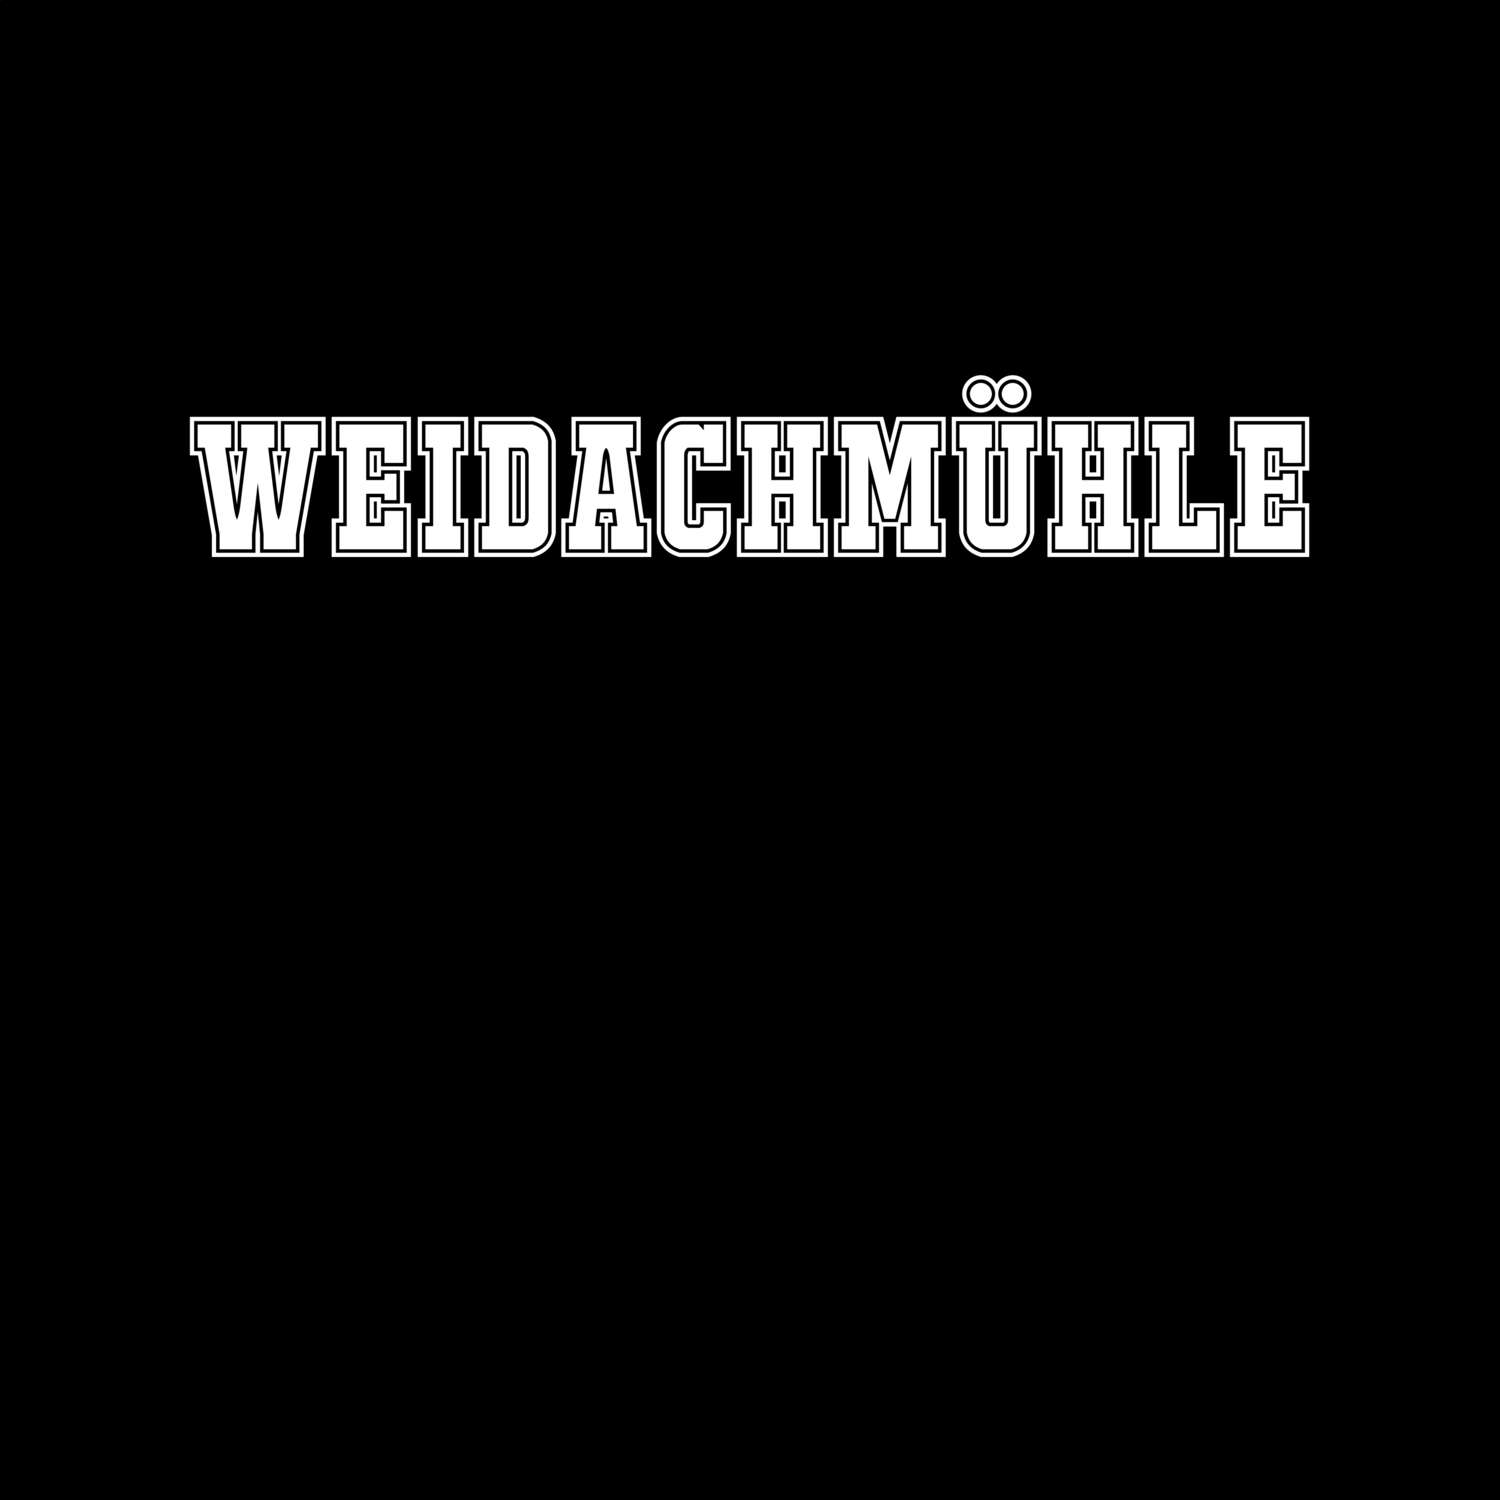 Weidachmühle T-Shirt »Classic«